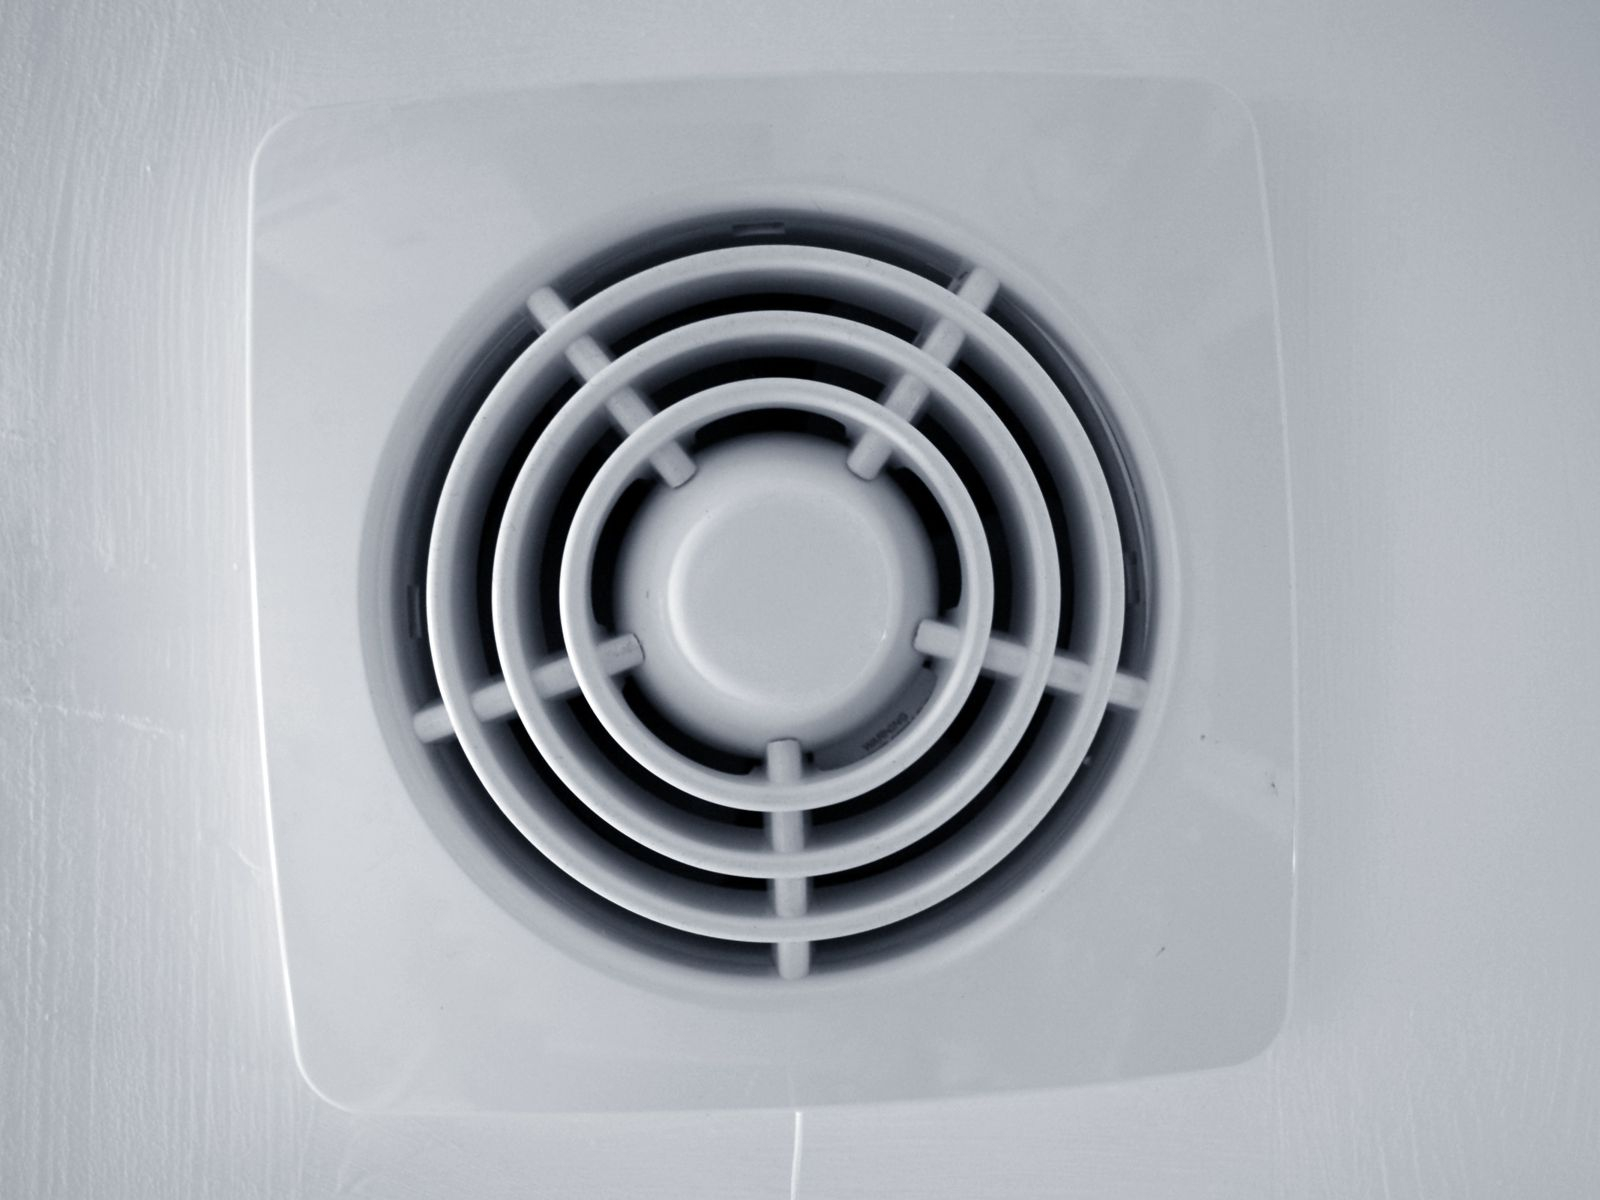 Bathroom Exhaust Fan Venting Code Basics within dimensions 1600 X 1200